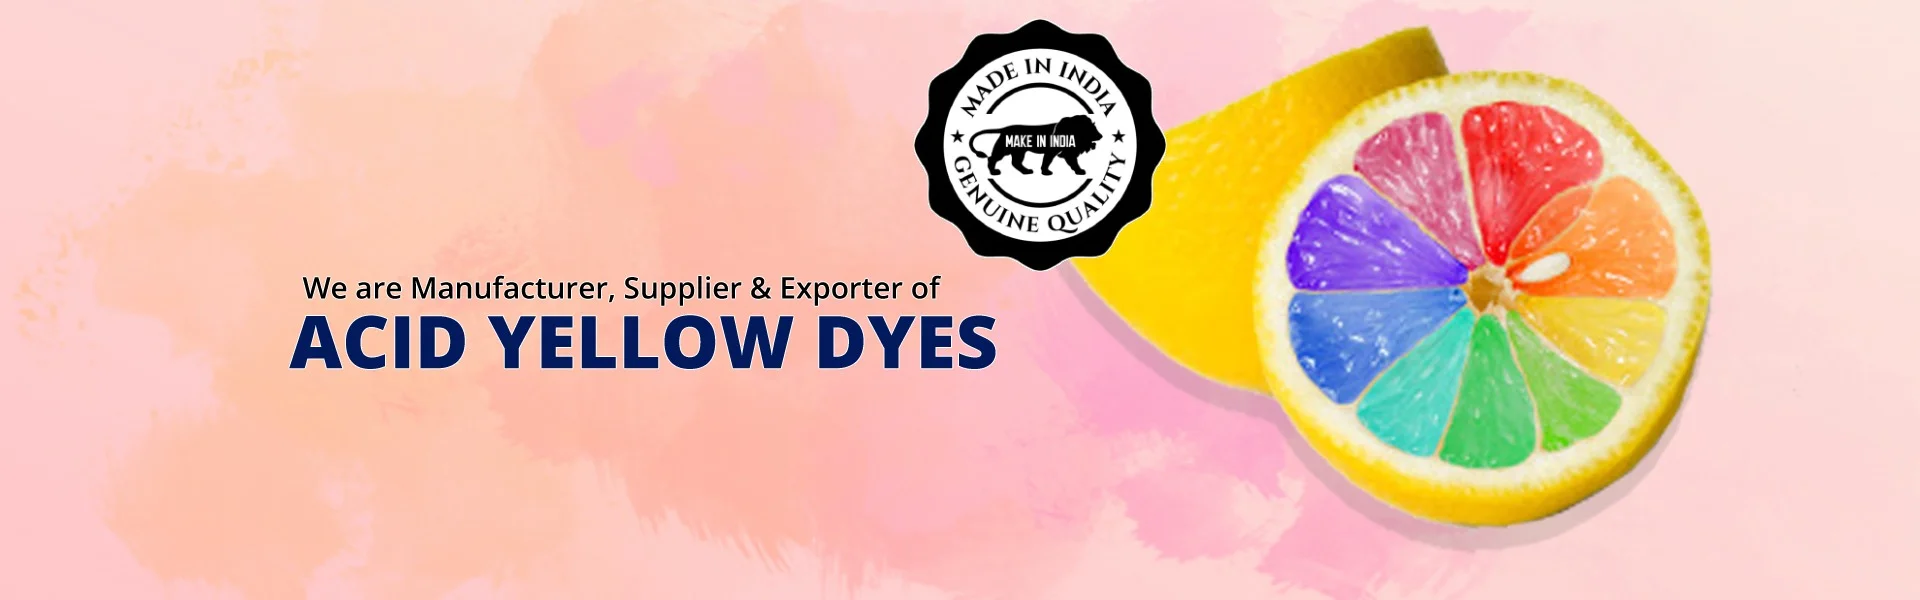 Acid Dyes in India, Supplier